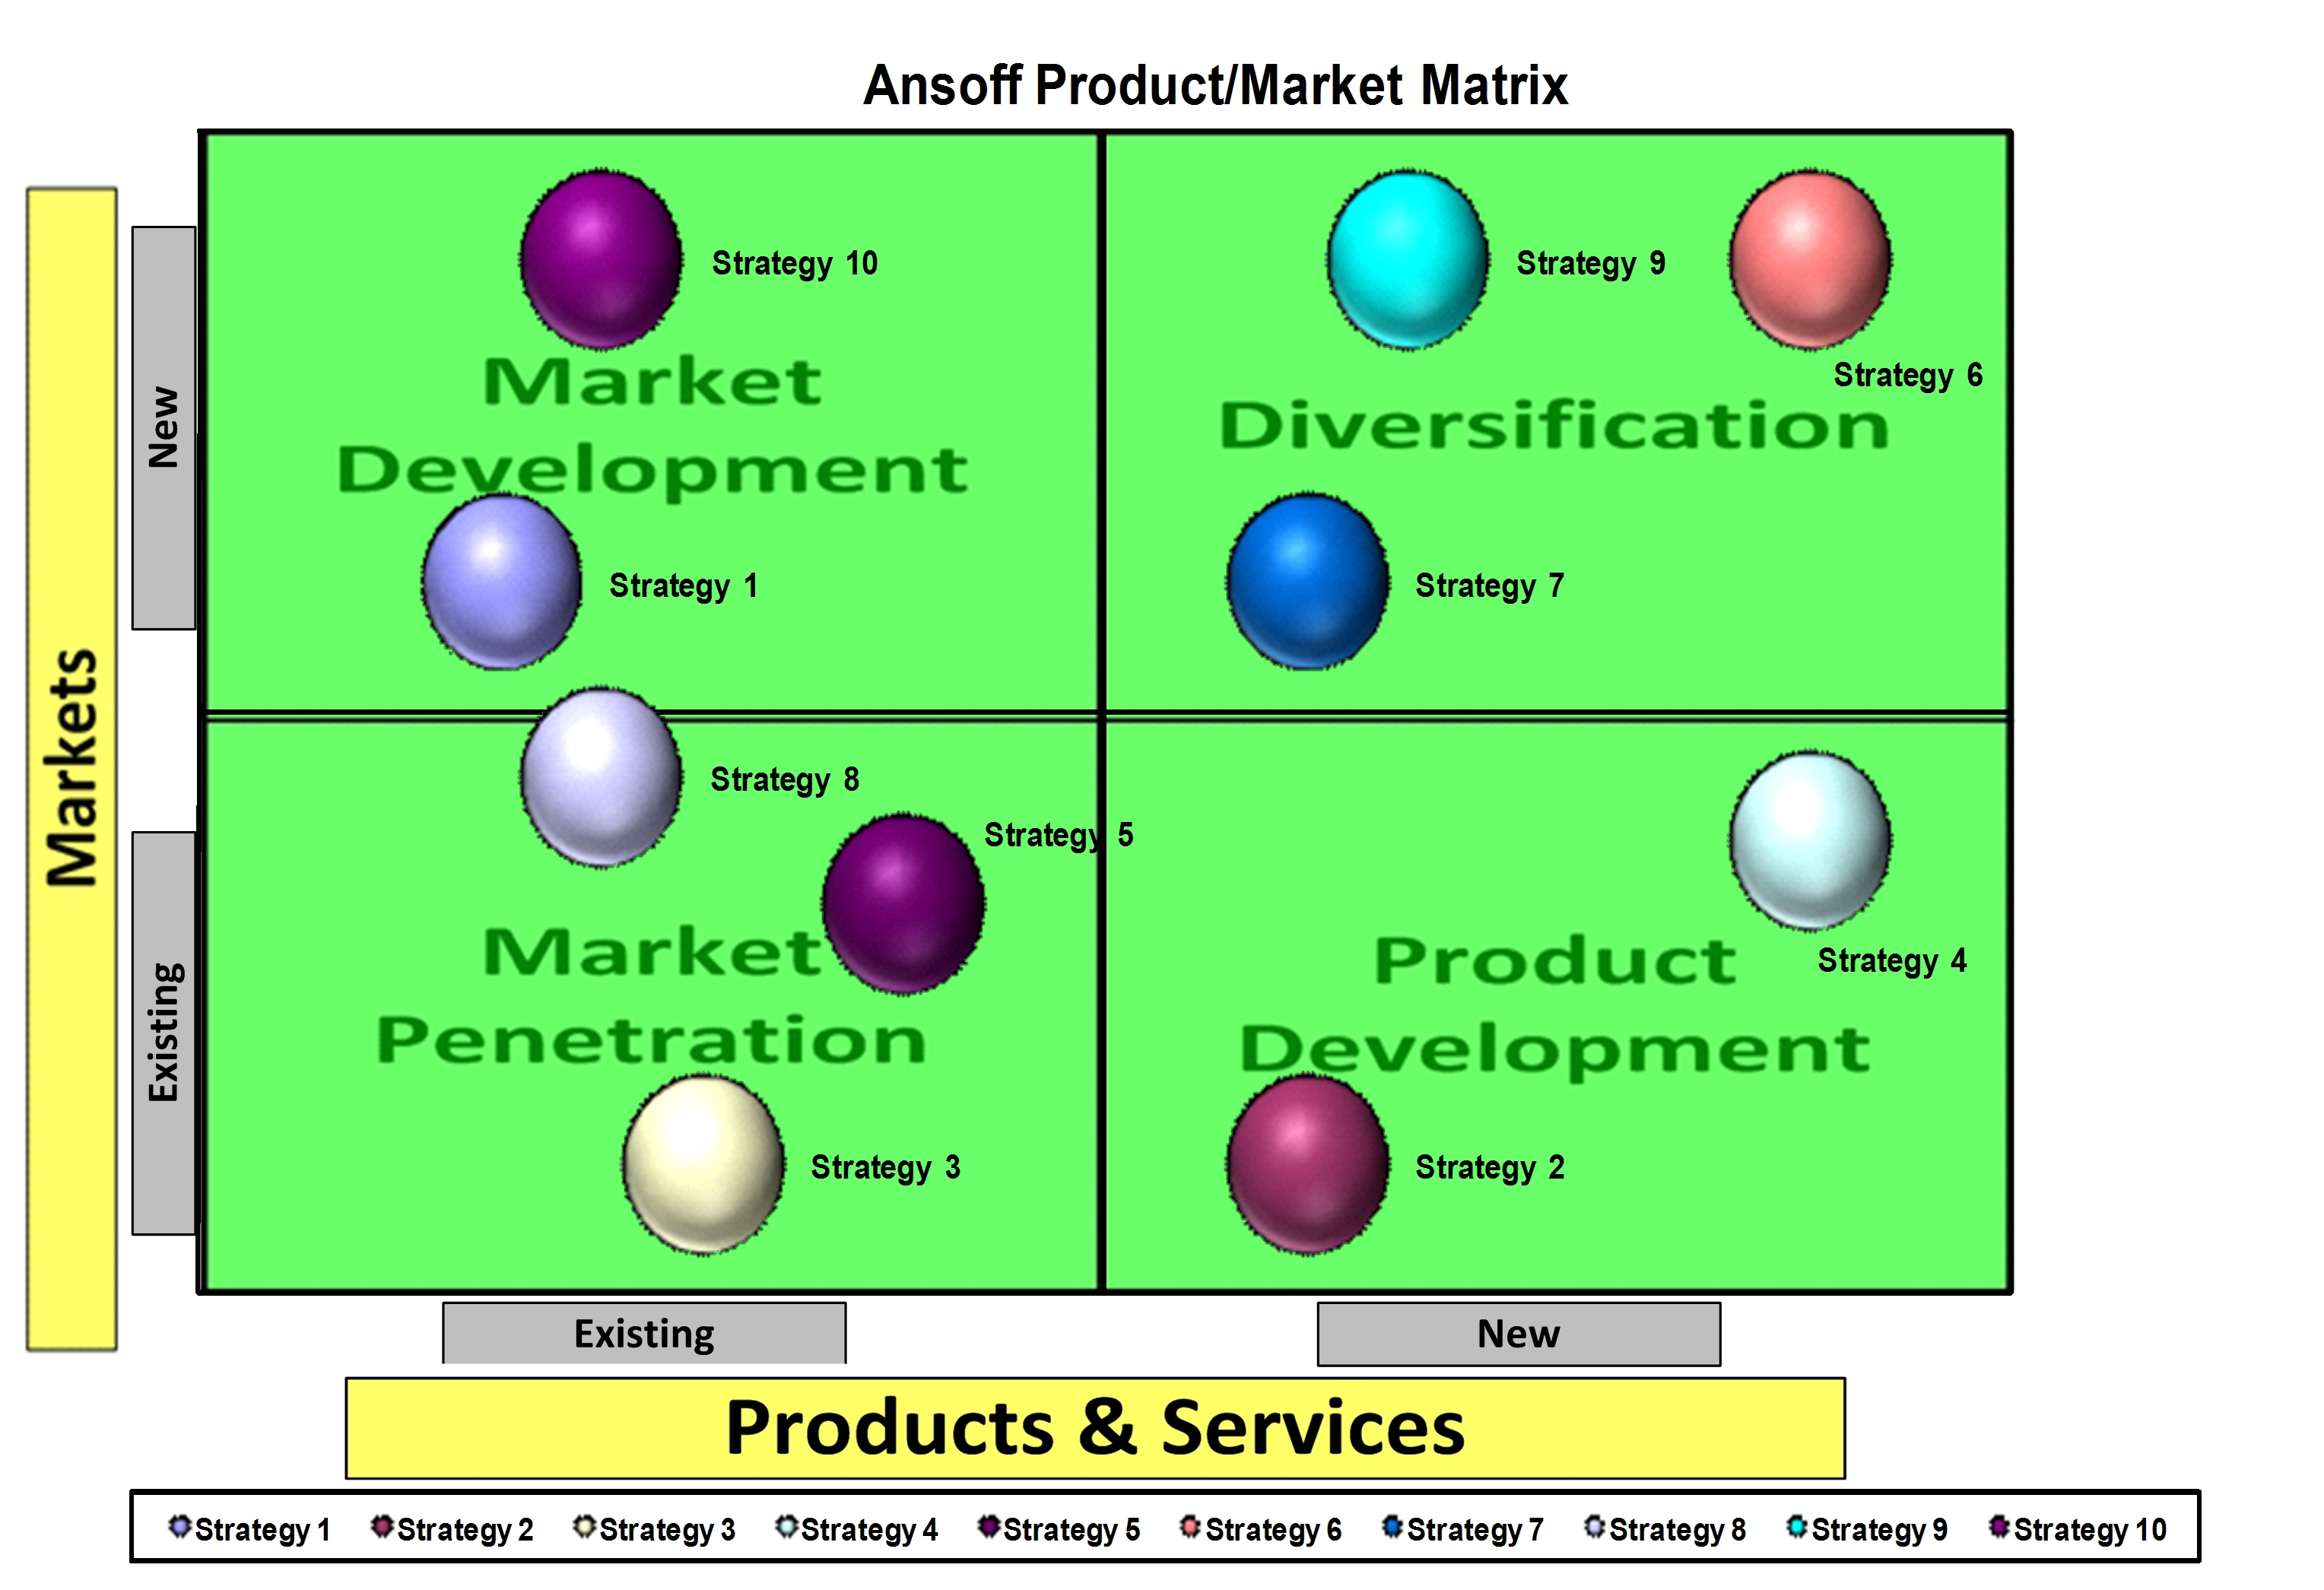 in diversification analysis product development refers to the marketing strategy of